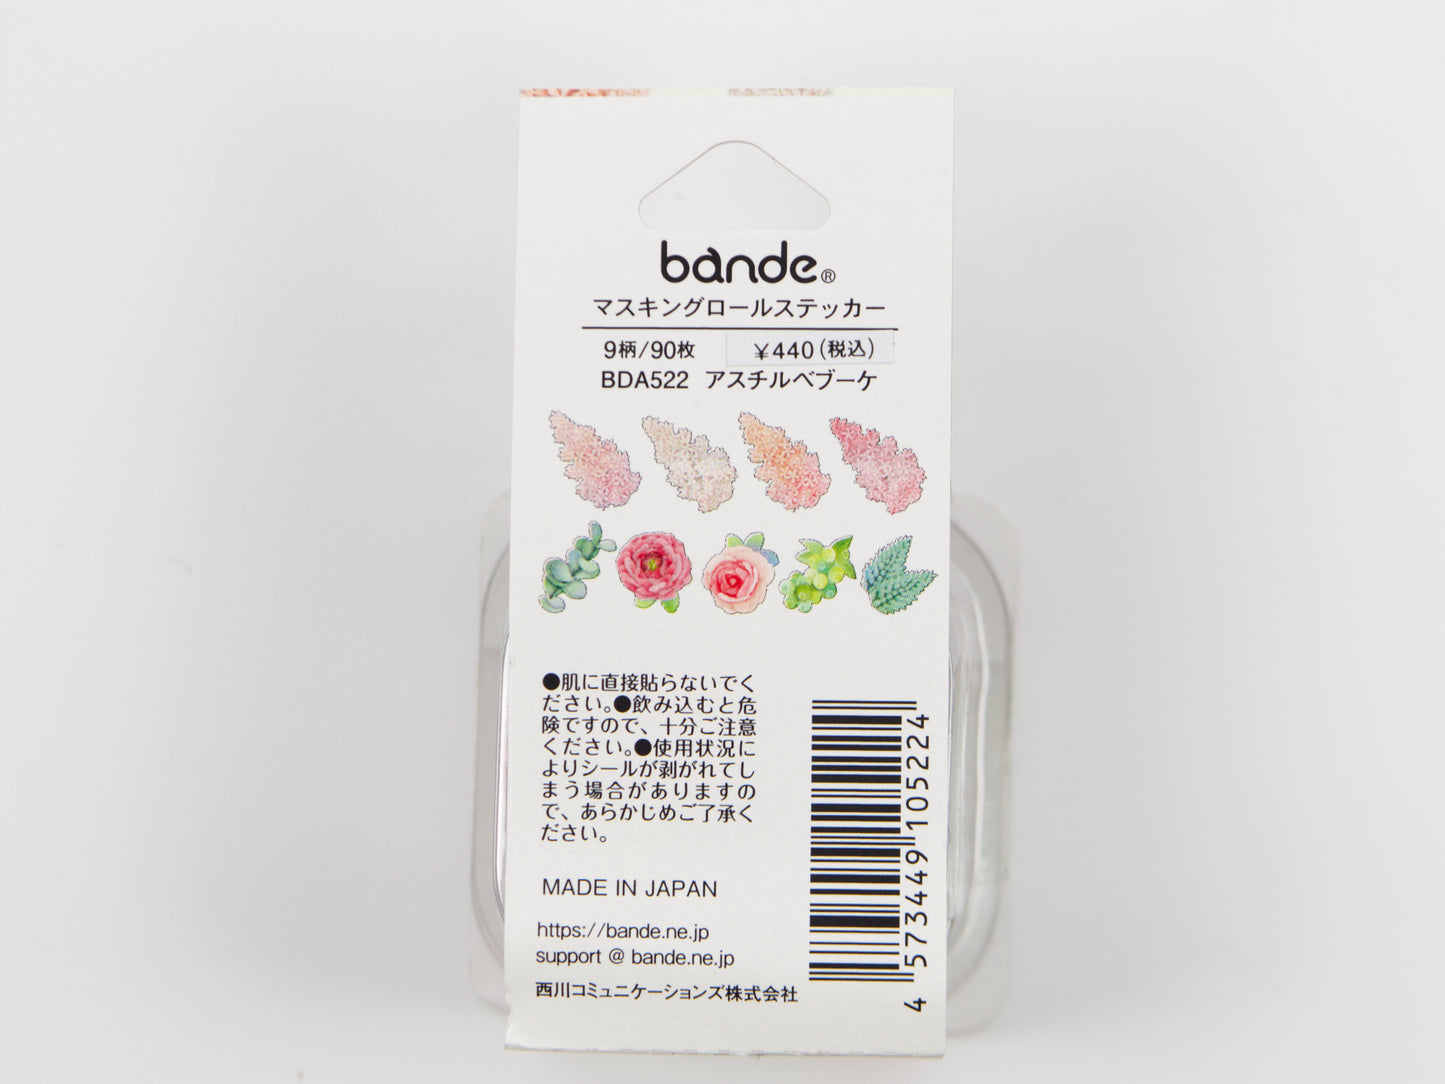 Bande Washi Roll Stickers - Large Floral